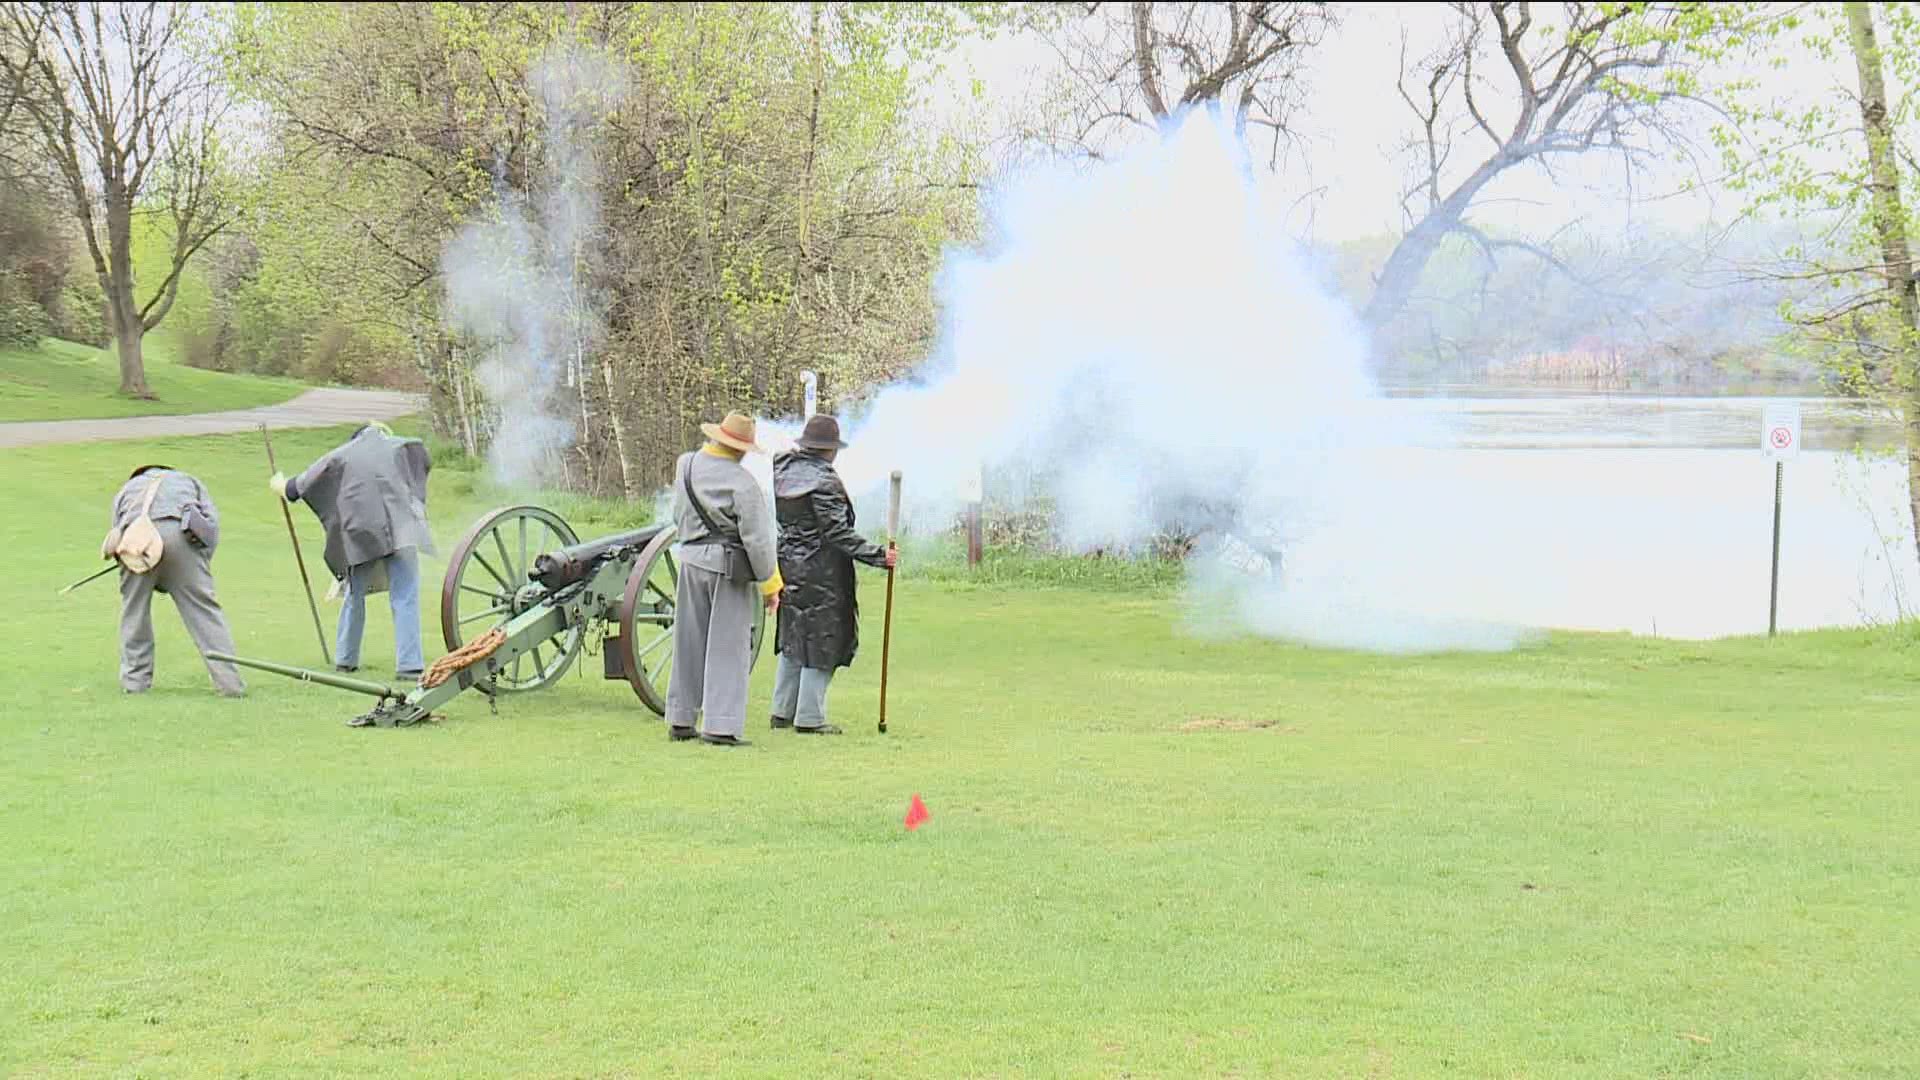 For the last 20 years, the Idaho Civil War Volunteers have put on Civil War presentations for elementary schools in the area.